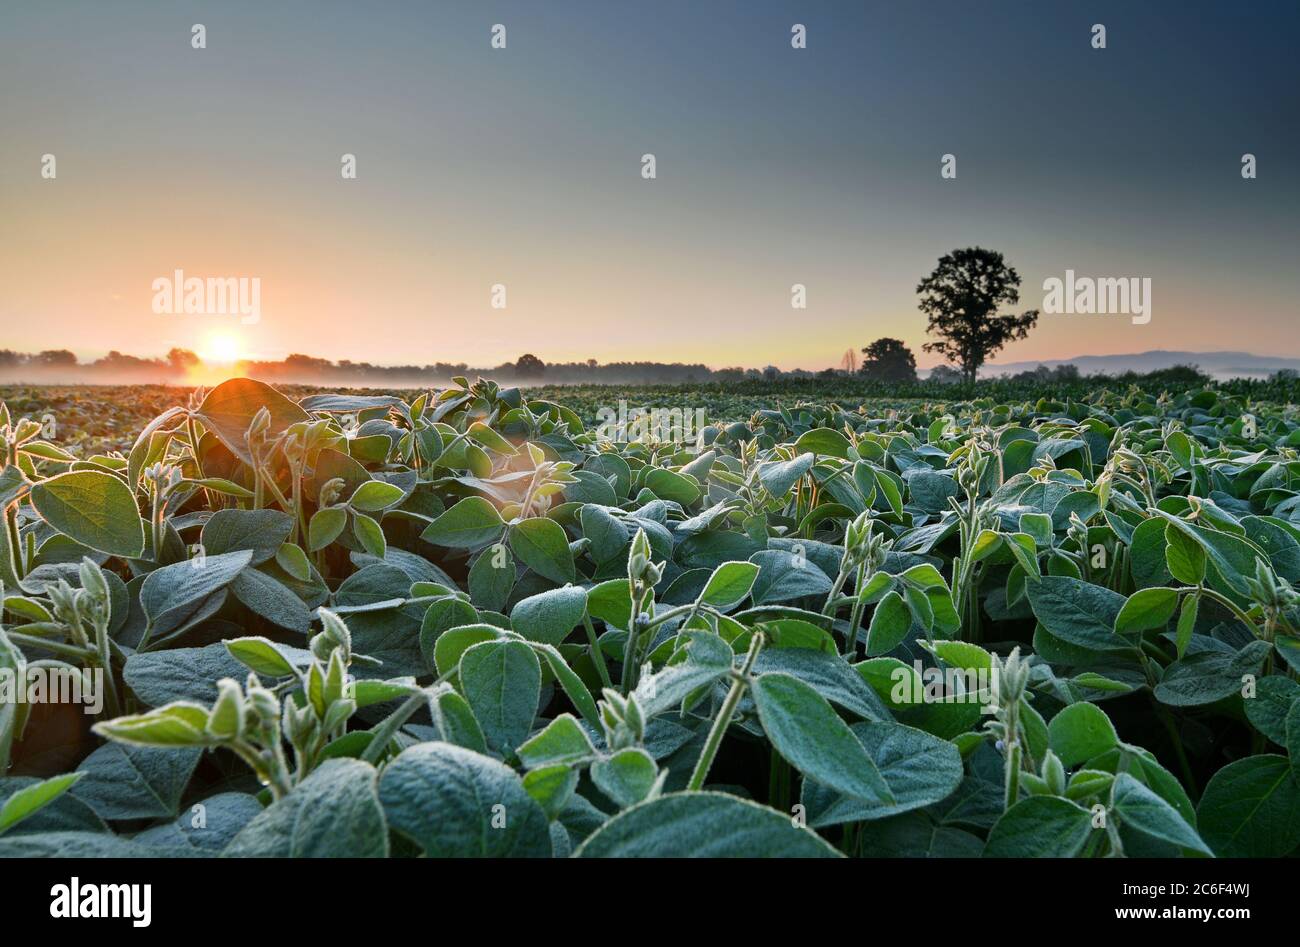 Field of soy plants, lit by early morning sunlight Stock Photo